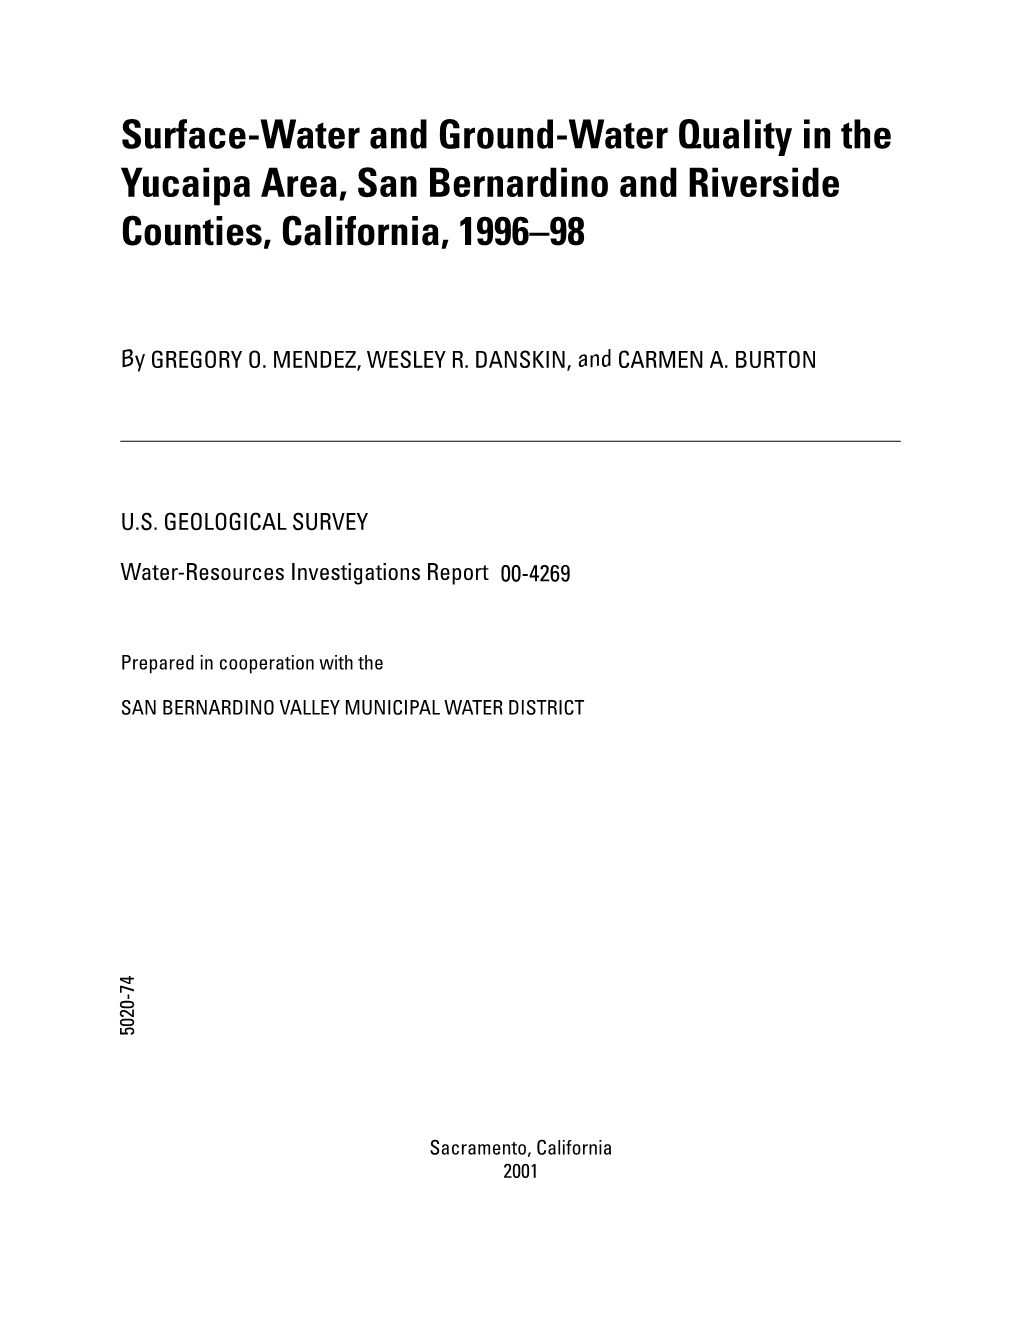 Surface-Water and Ground-Water Quality in the Yucaipa Area, San Bernardino and Riverside Counties, California, 1996–98